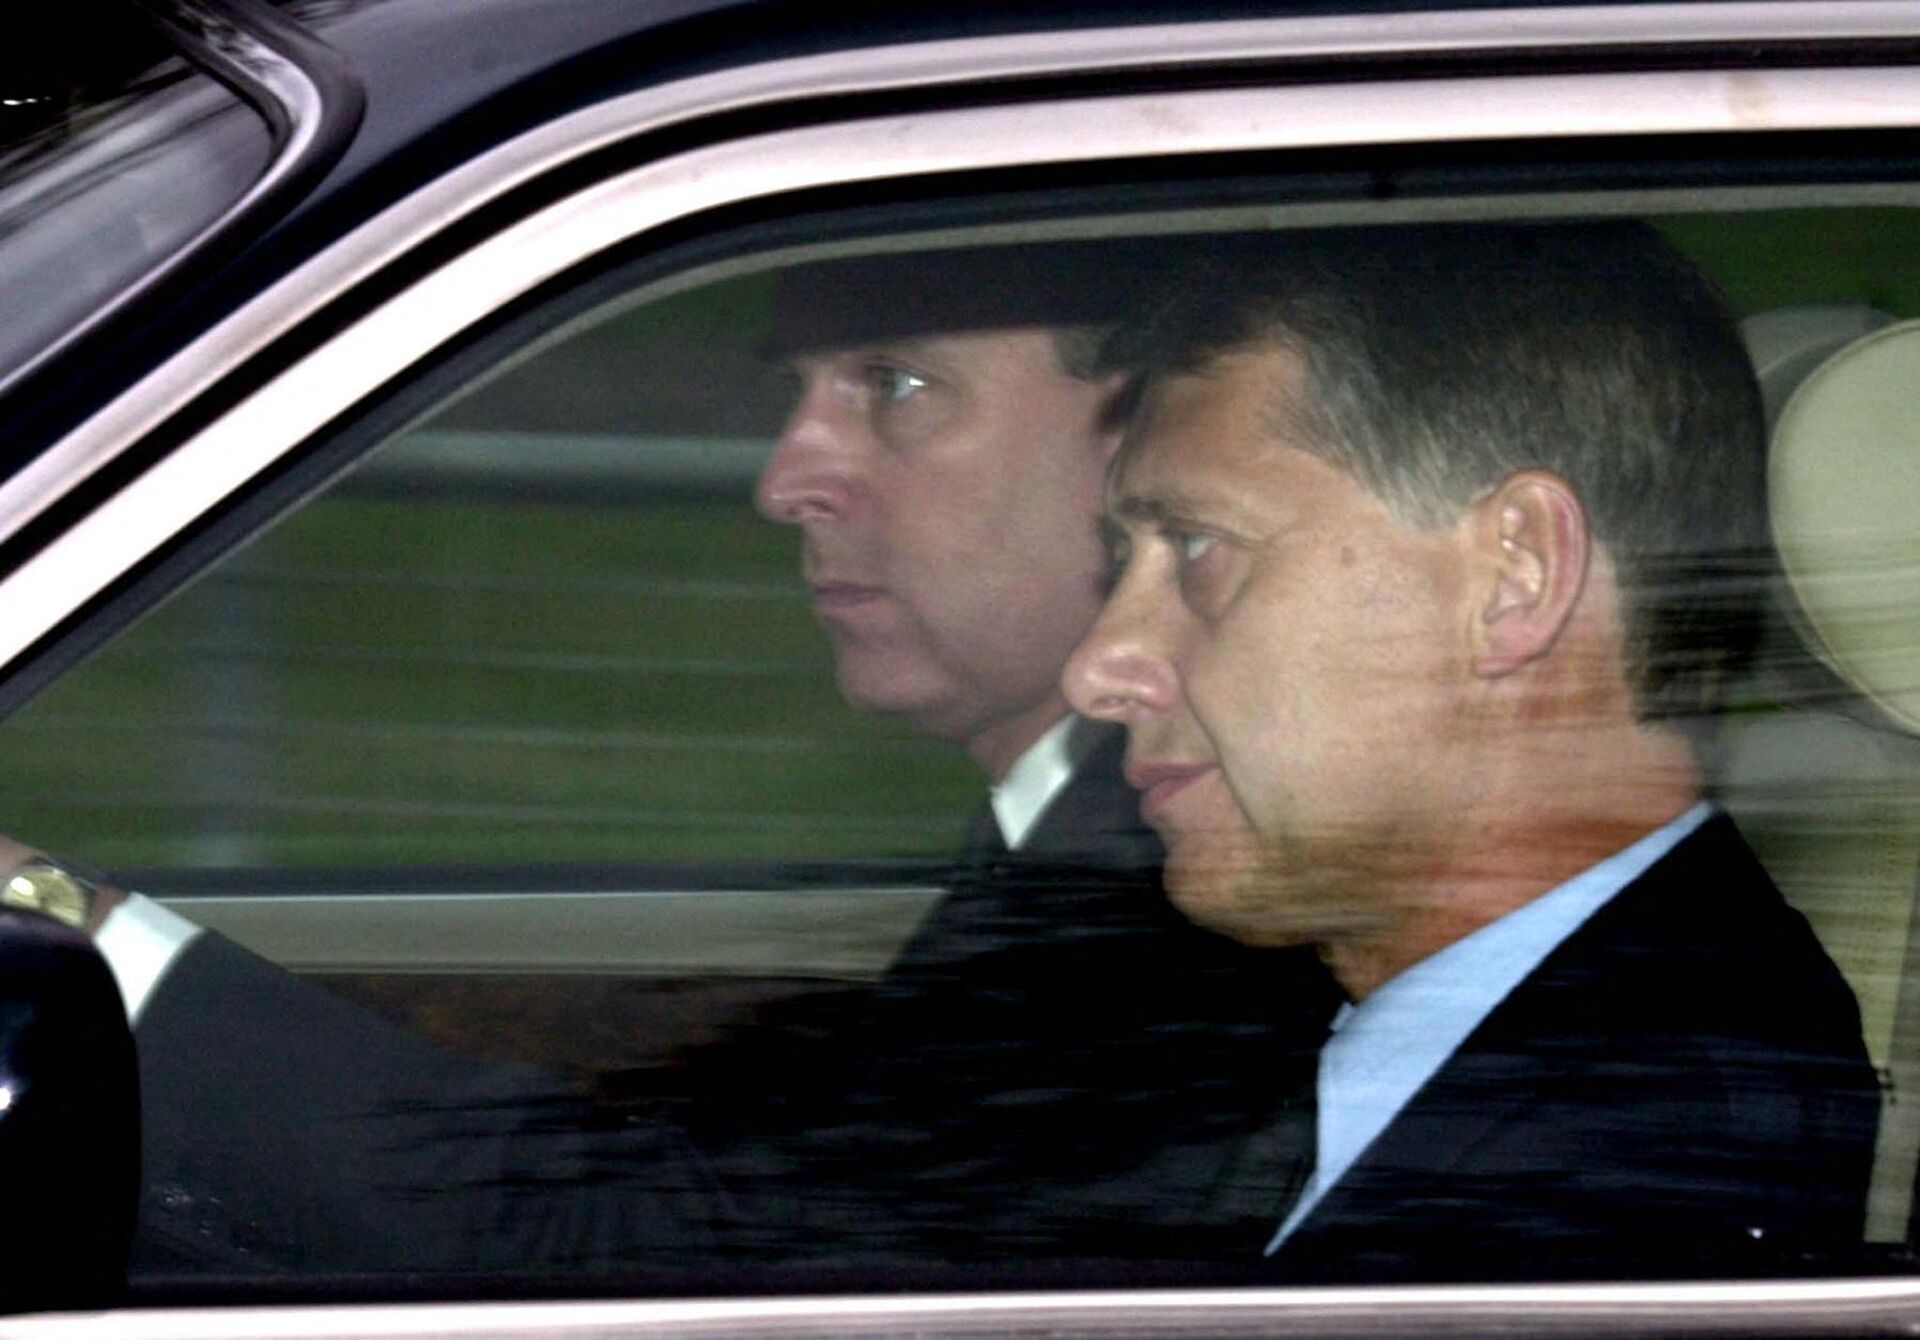 Prince Andrew at the wheel of his car next to a detective arrives at the Chapel Royal, Windsor Park, 31 March 2002 - Sputnik International, 1920, 20.06.2022